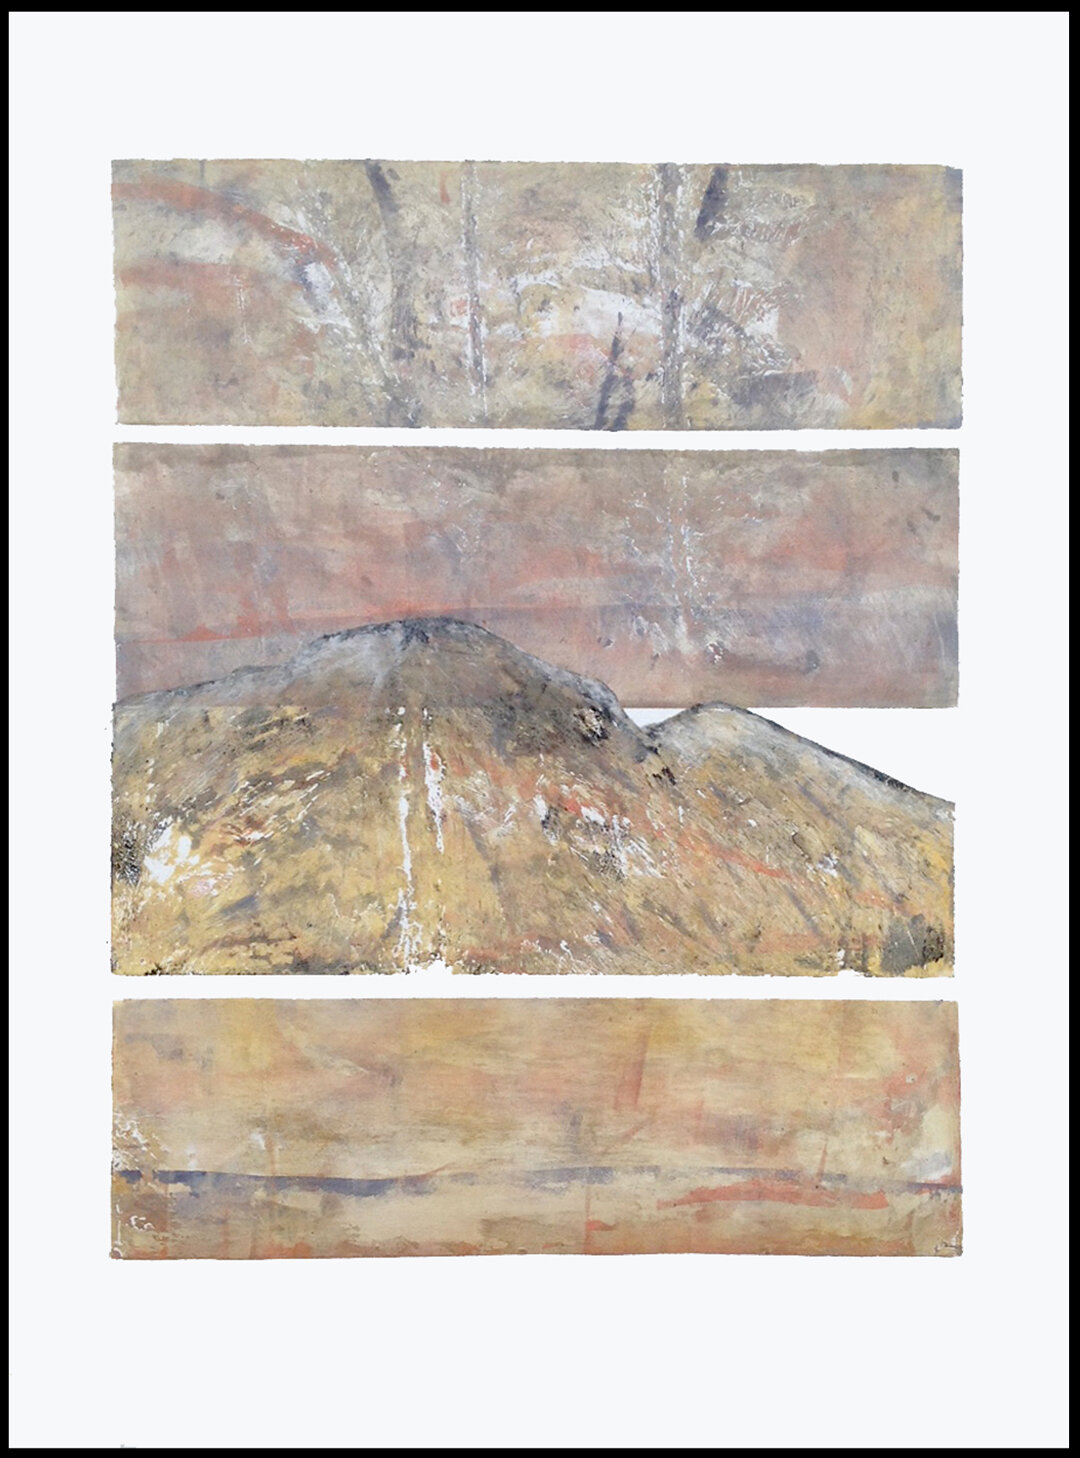  With a nod to our beautiful mountains,   Stands Alone   is a unique monotype. The substrates are hand textured templates inked and overlaid with color several times to create this print. It measures 22 x 30 inches.   $425    